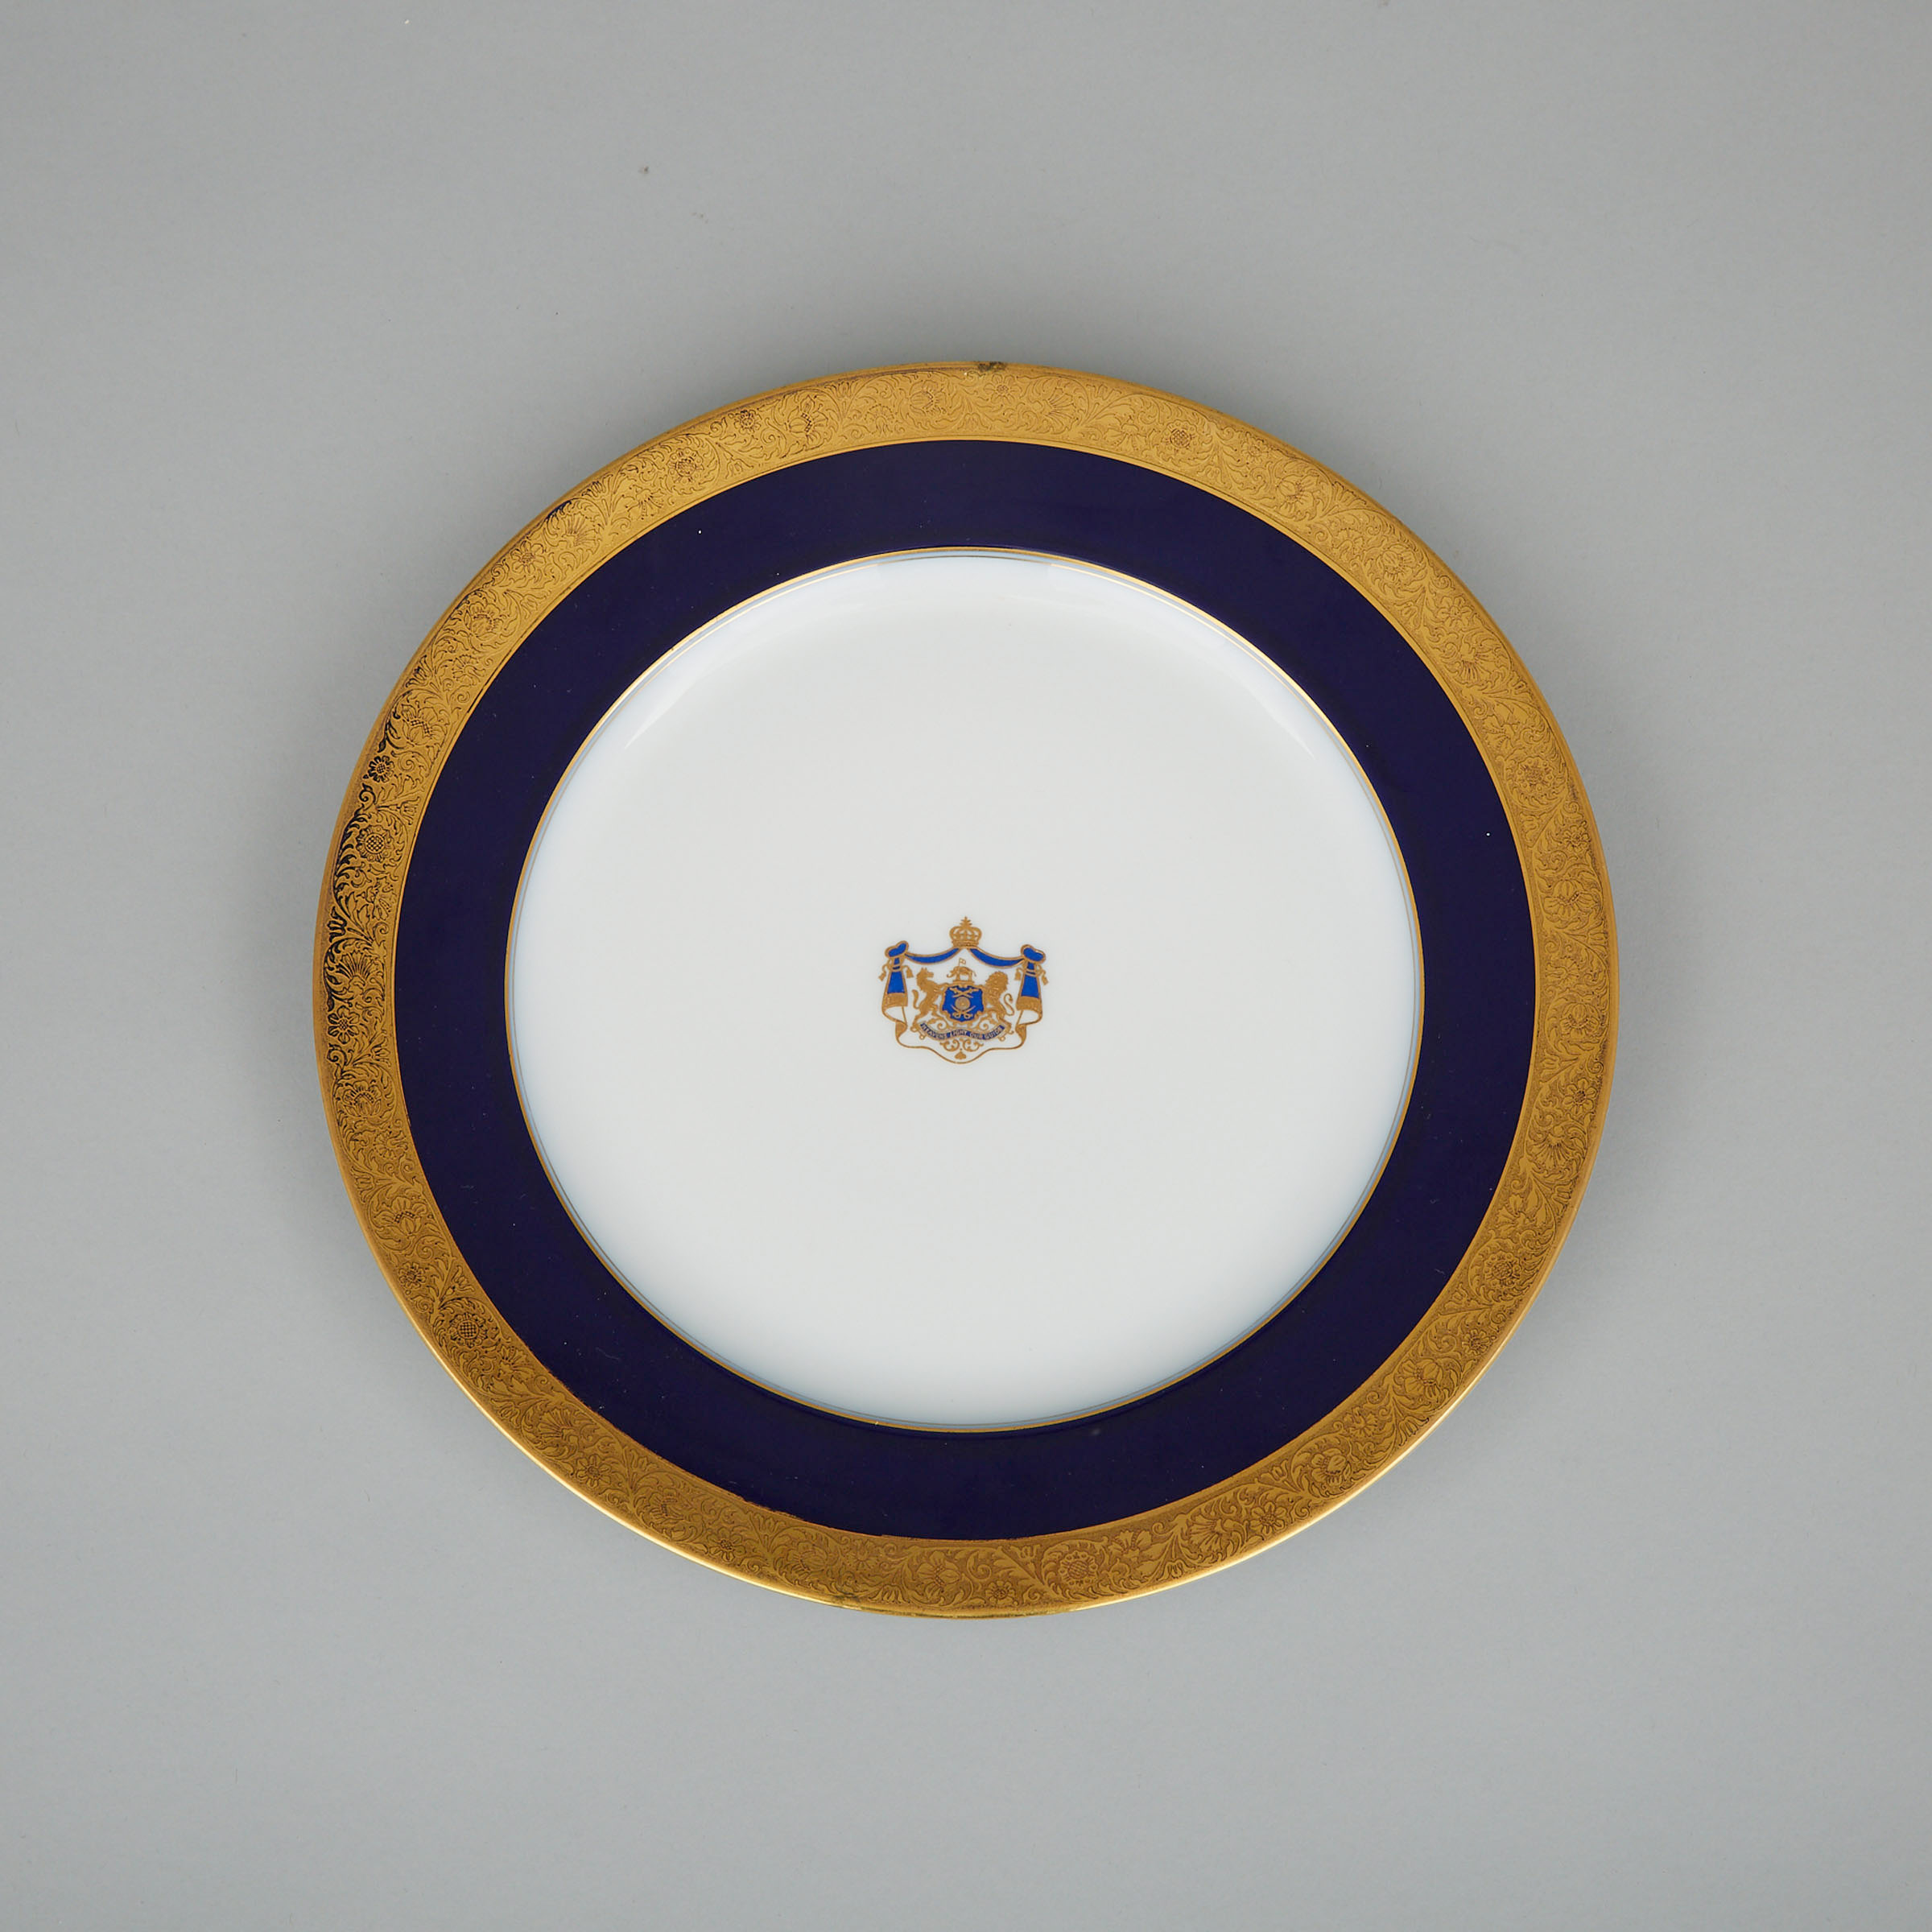 Rosenthal Armorial Service Plate for the Maharaja of Patiala, Yadavindra Singh, mid-20th century